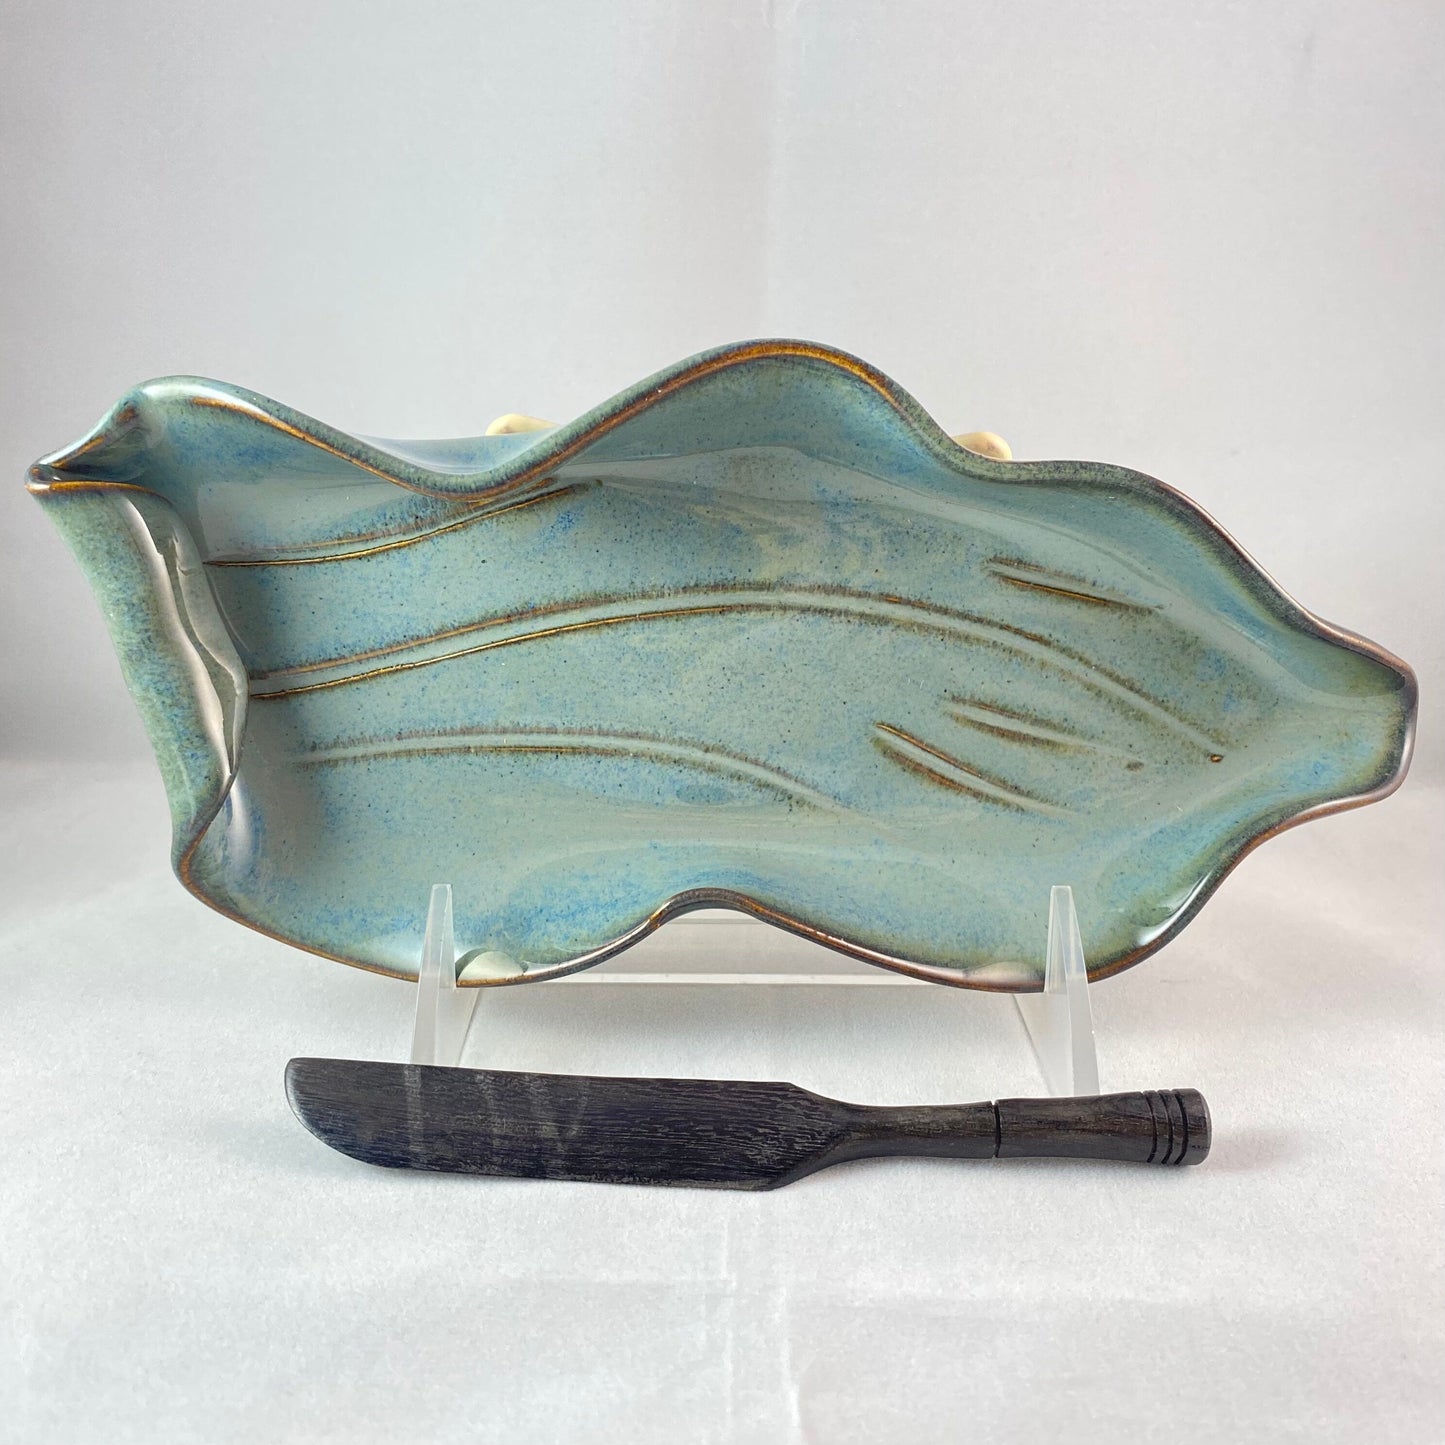 Handmade Butter Dish with Small Knife, Functional and Decorative Pottery